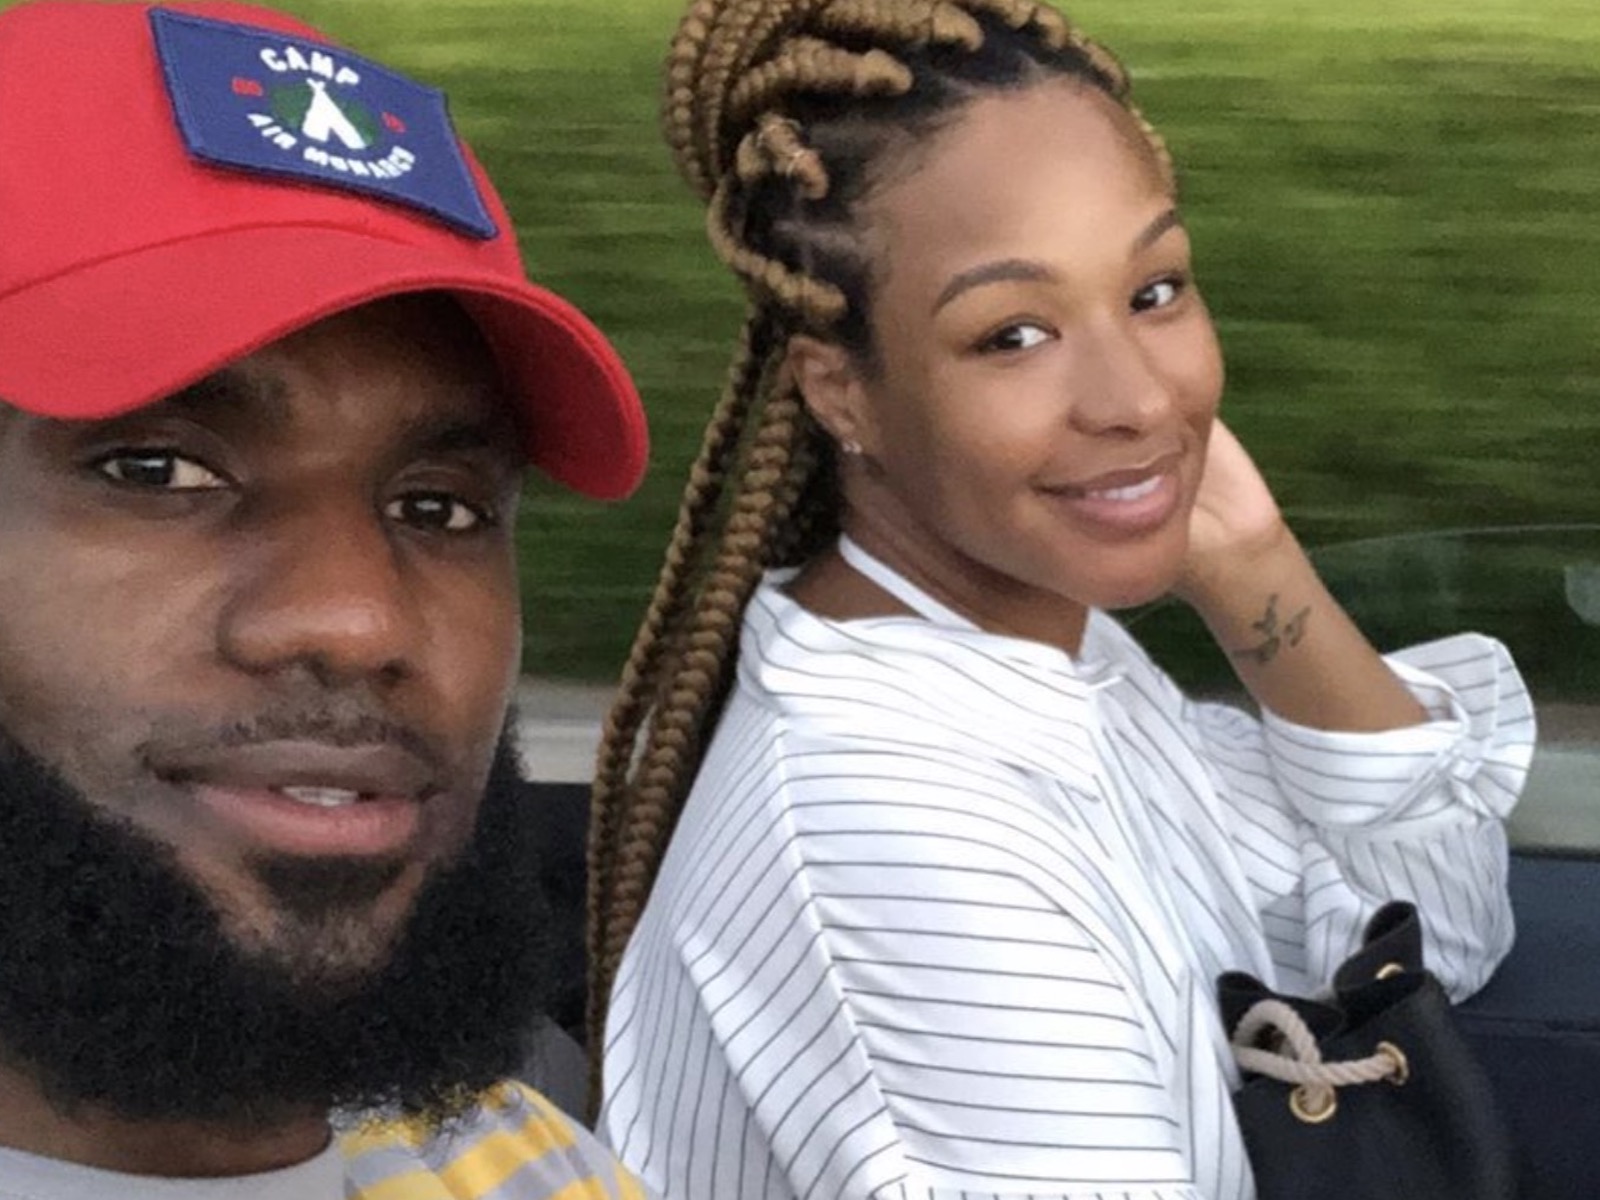 Look: LeBron James Shares Priceless Moments To Celebrate Wife Savannah James' B-Day1600 x 1200